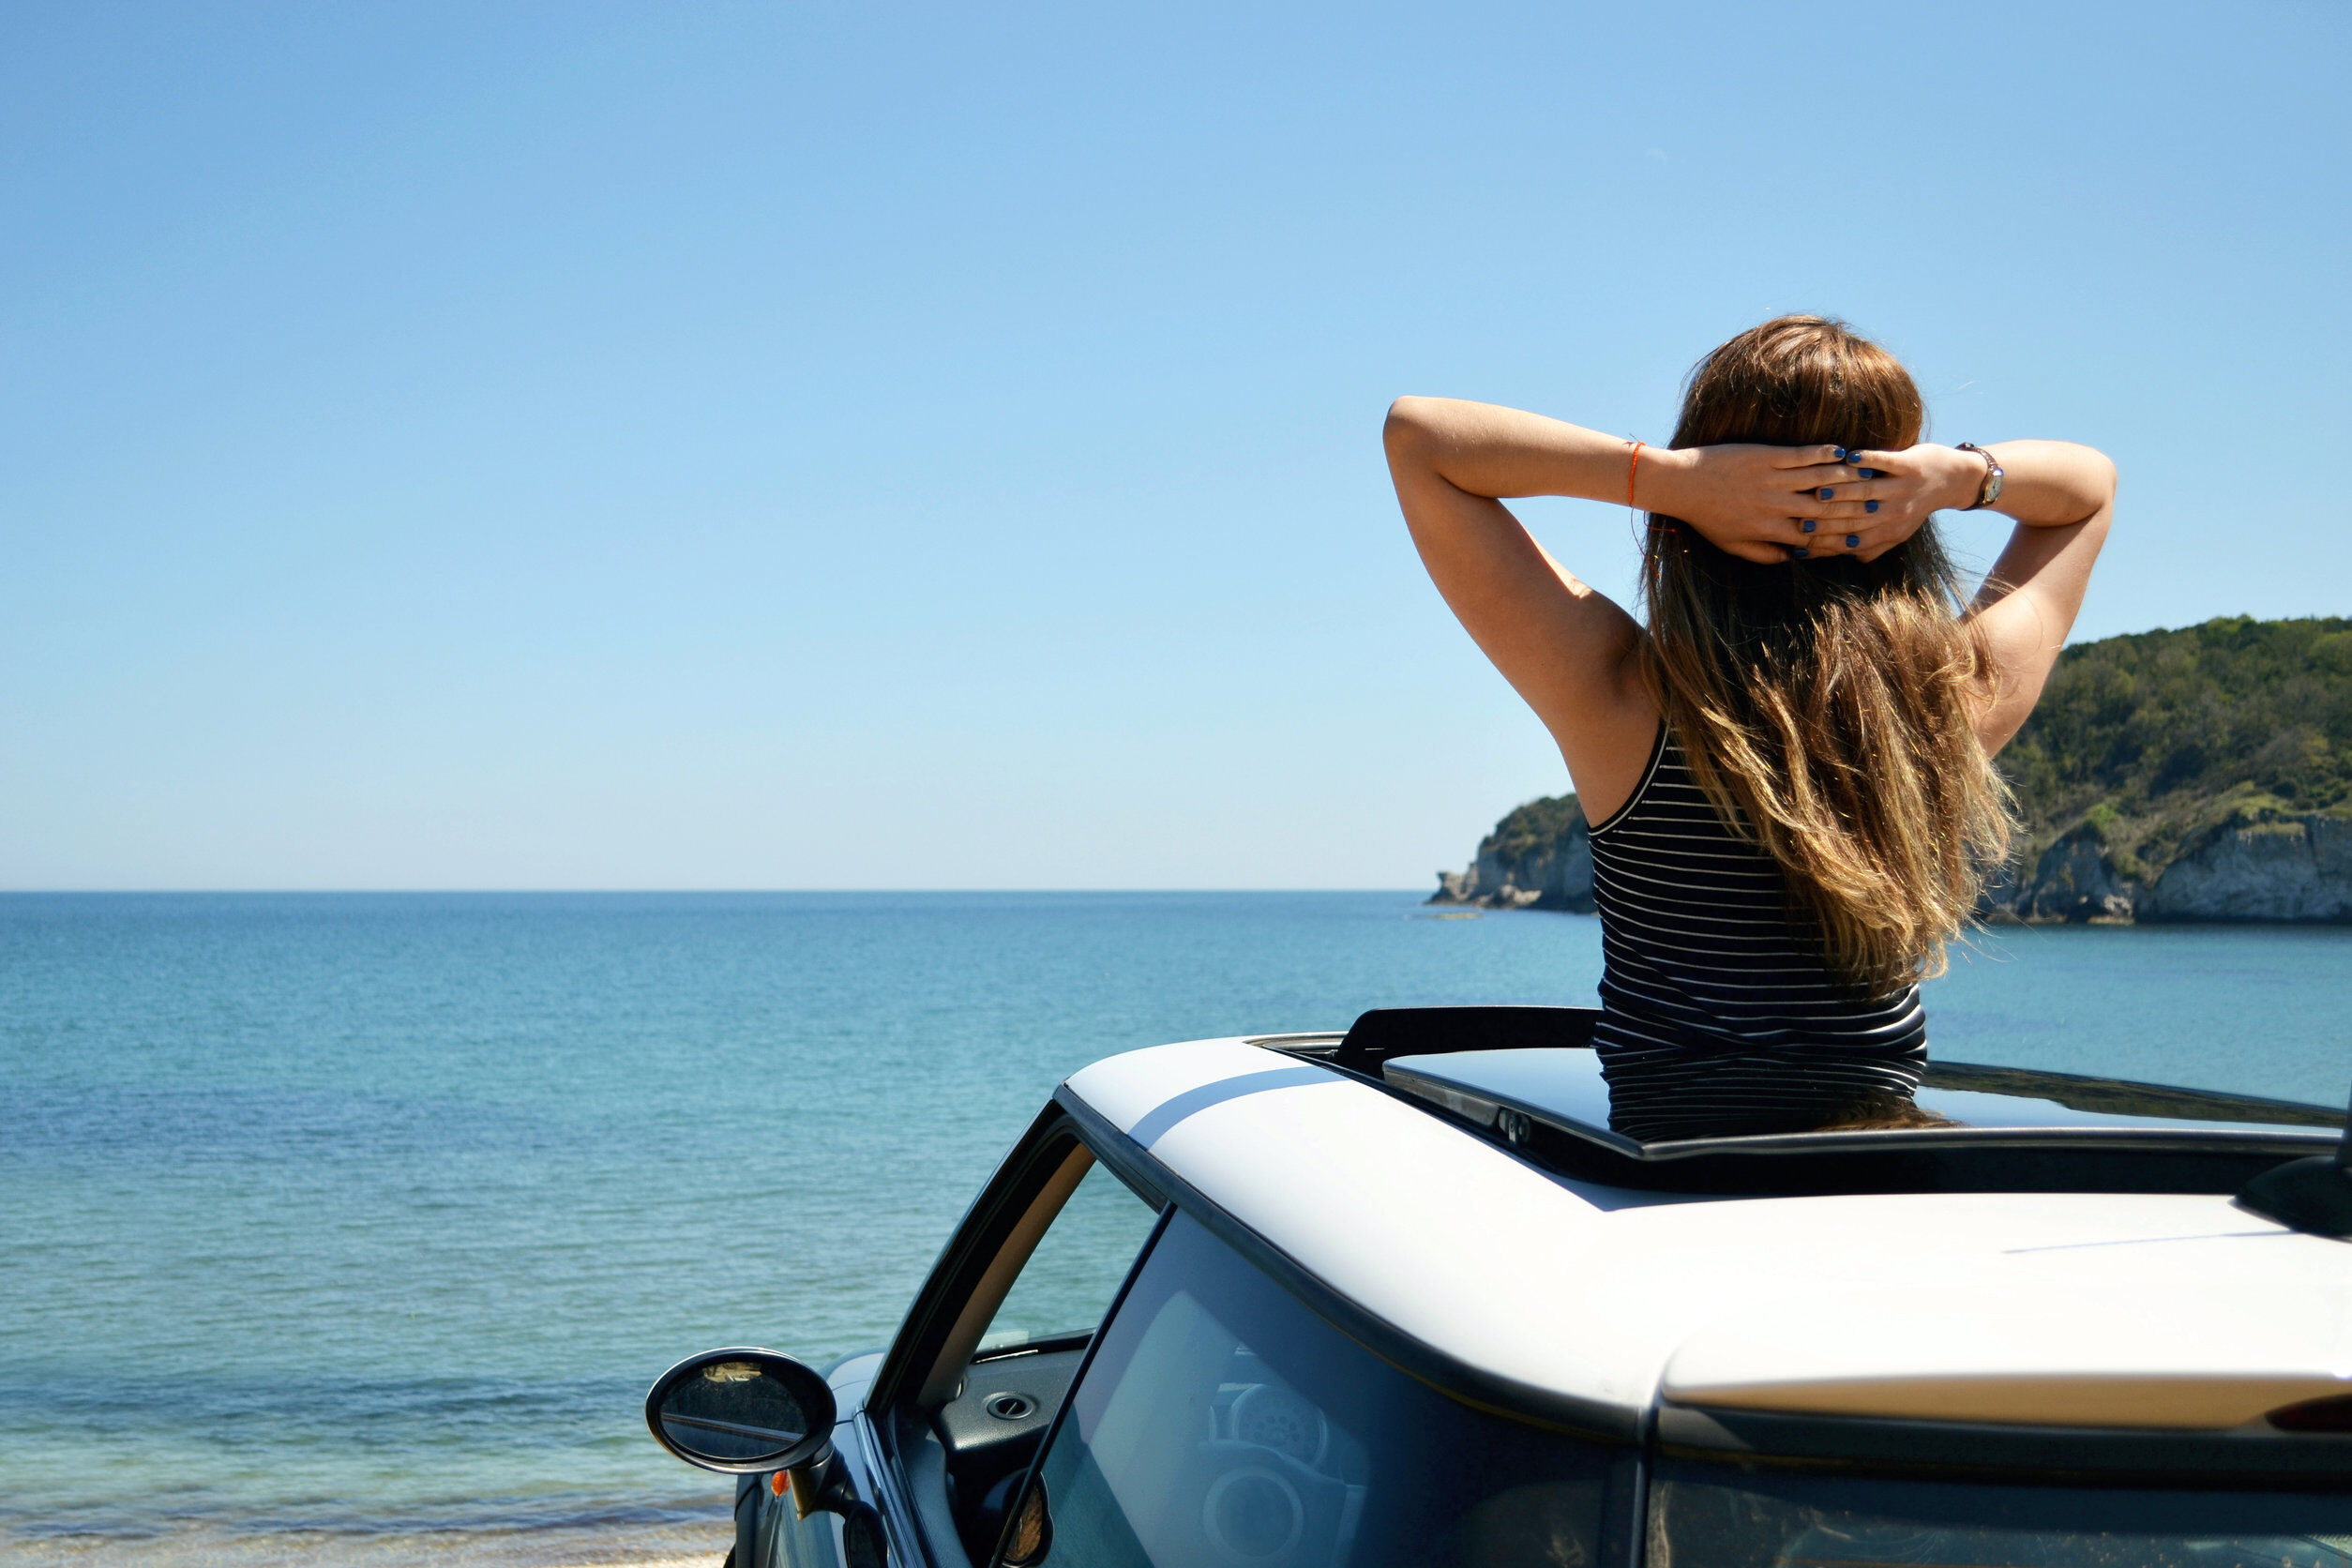 How to enjoy care free car rental on Costa del Sol